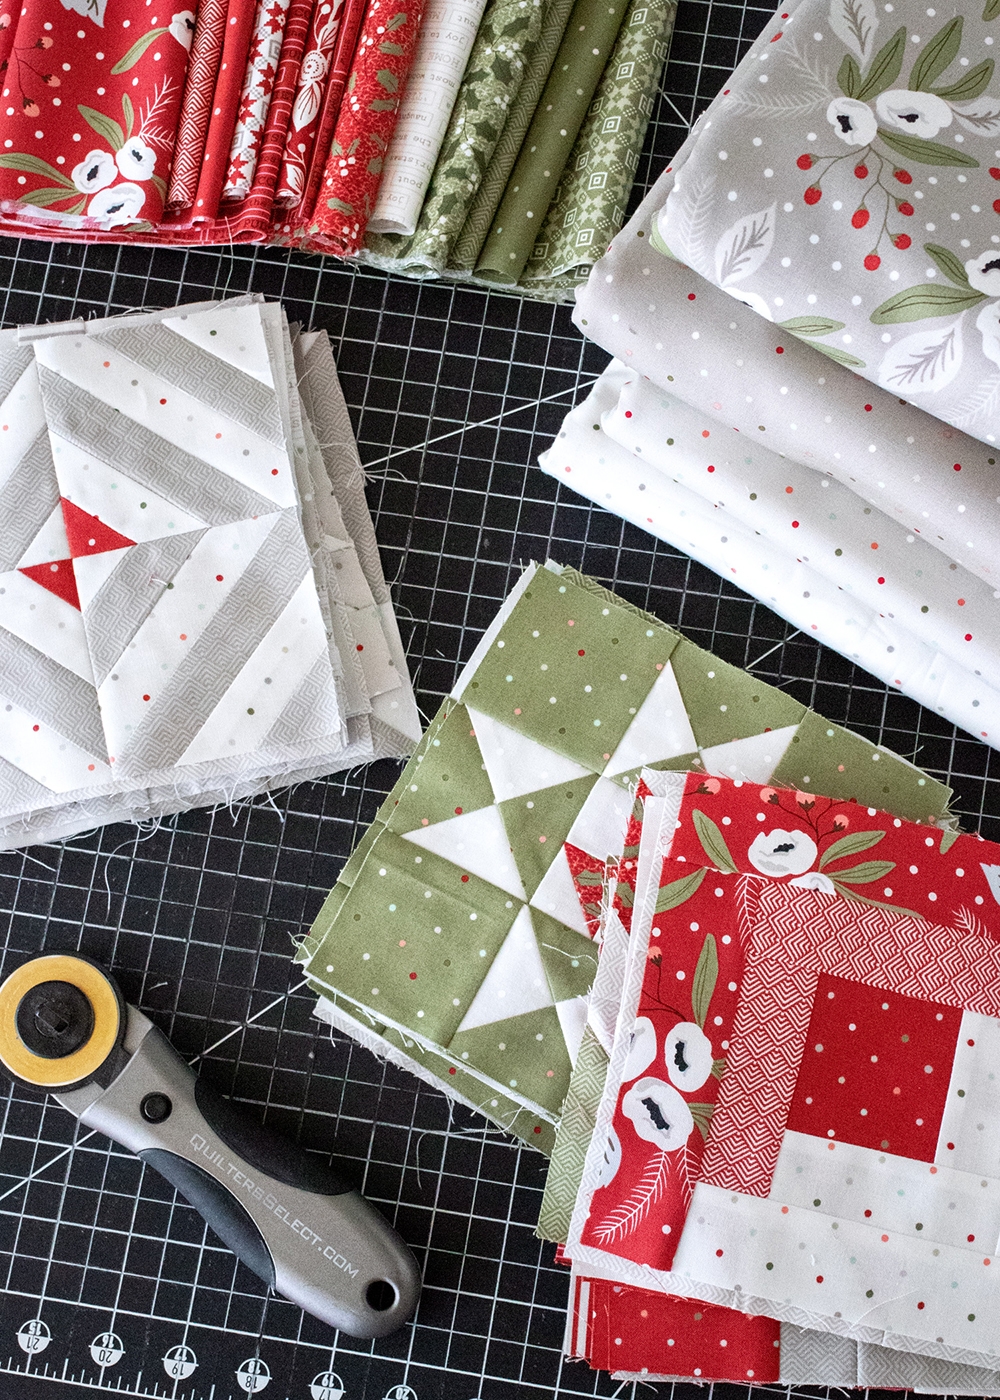 Sewcialites Quilt Along Layout using Christmas Morning fabrics + Lella Boutique's Rose in Bloom quilt layout. Materials List here!